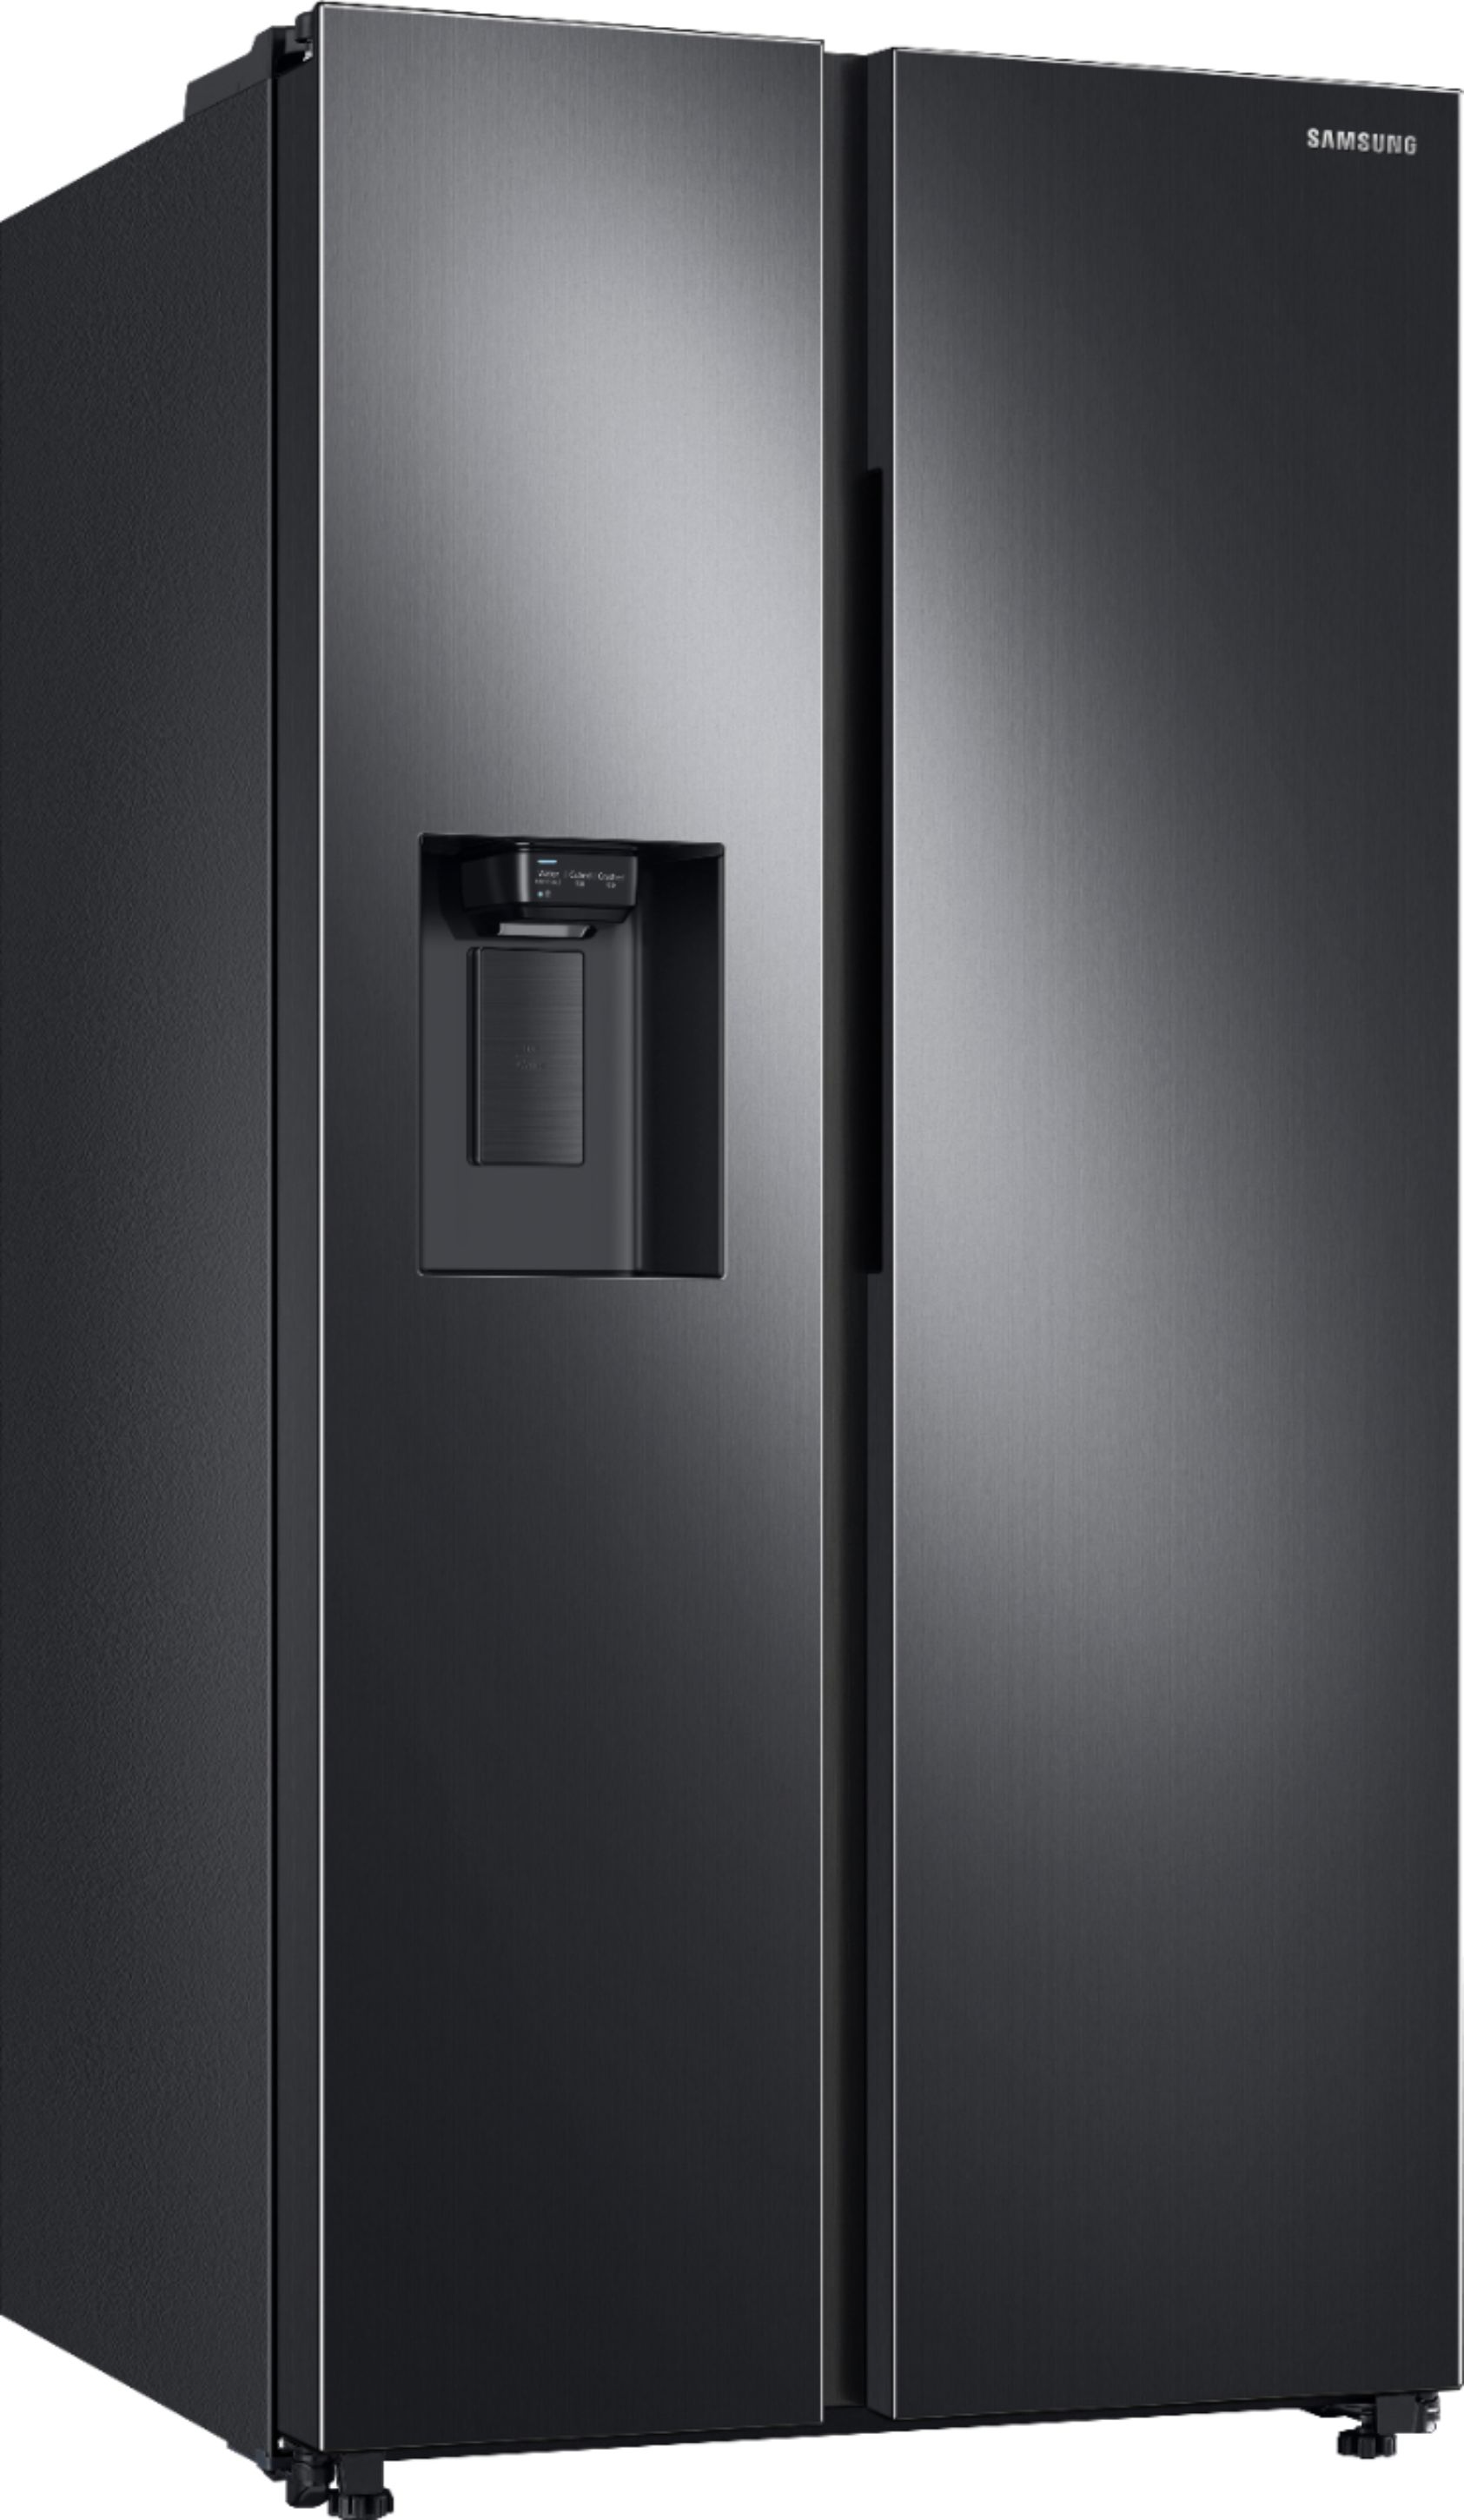 Angle View: Samsung - 27.4 cu. ft. Side-by-Side Refrigerator with Large Capacity - Black Stainless Steel